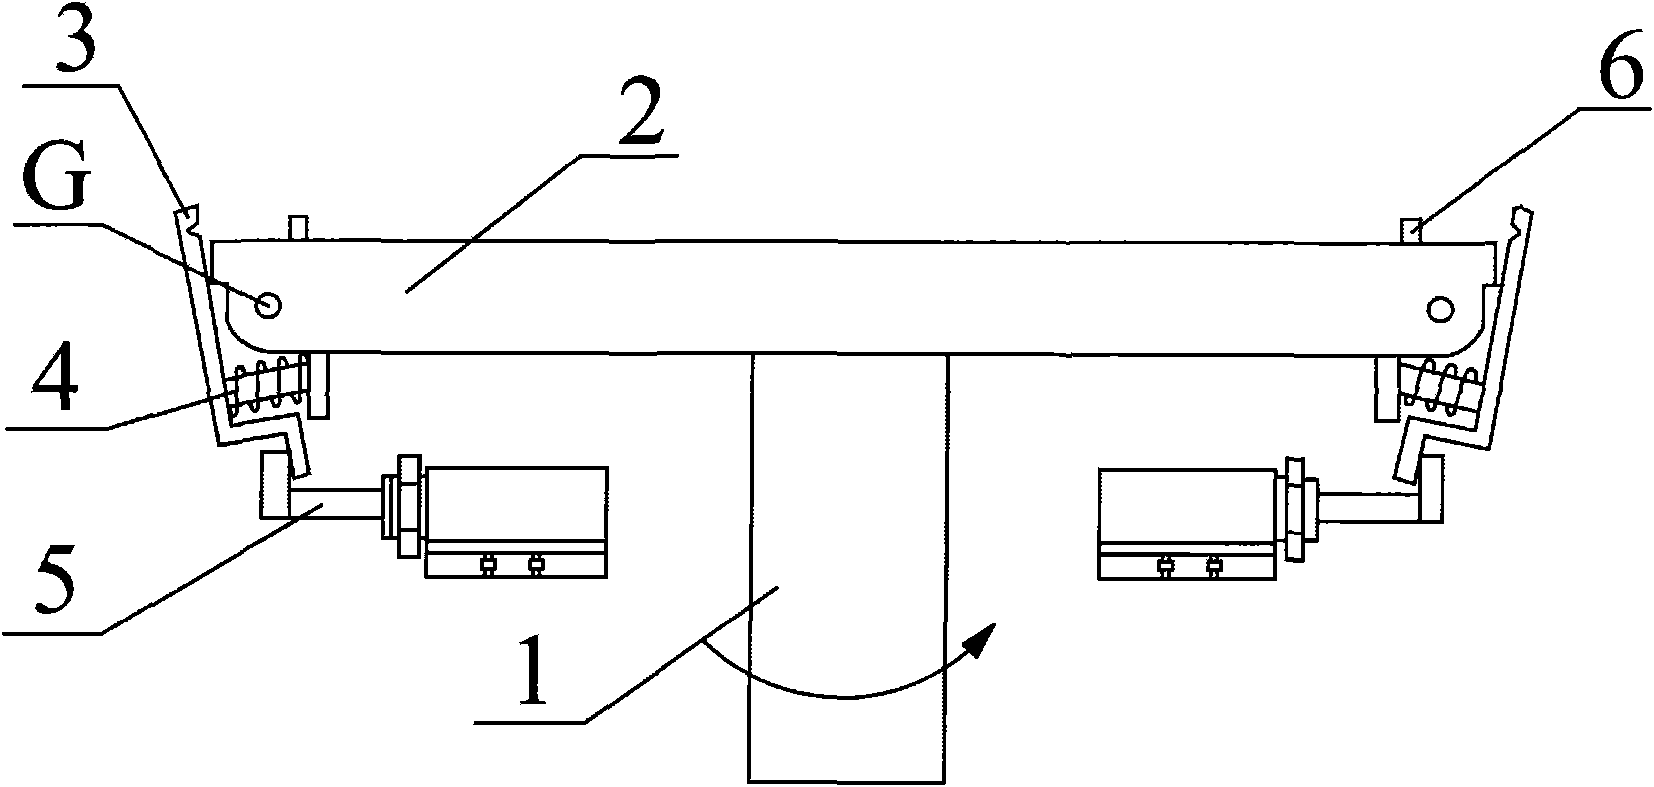 Device for holding plate-like article